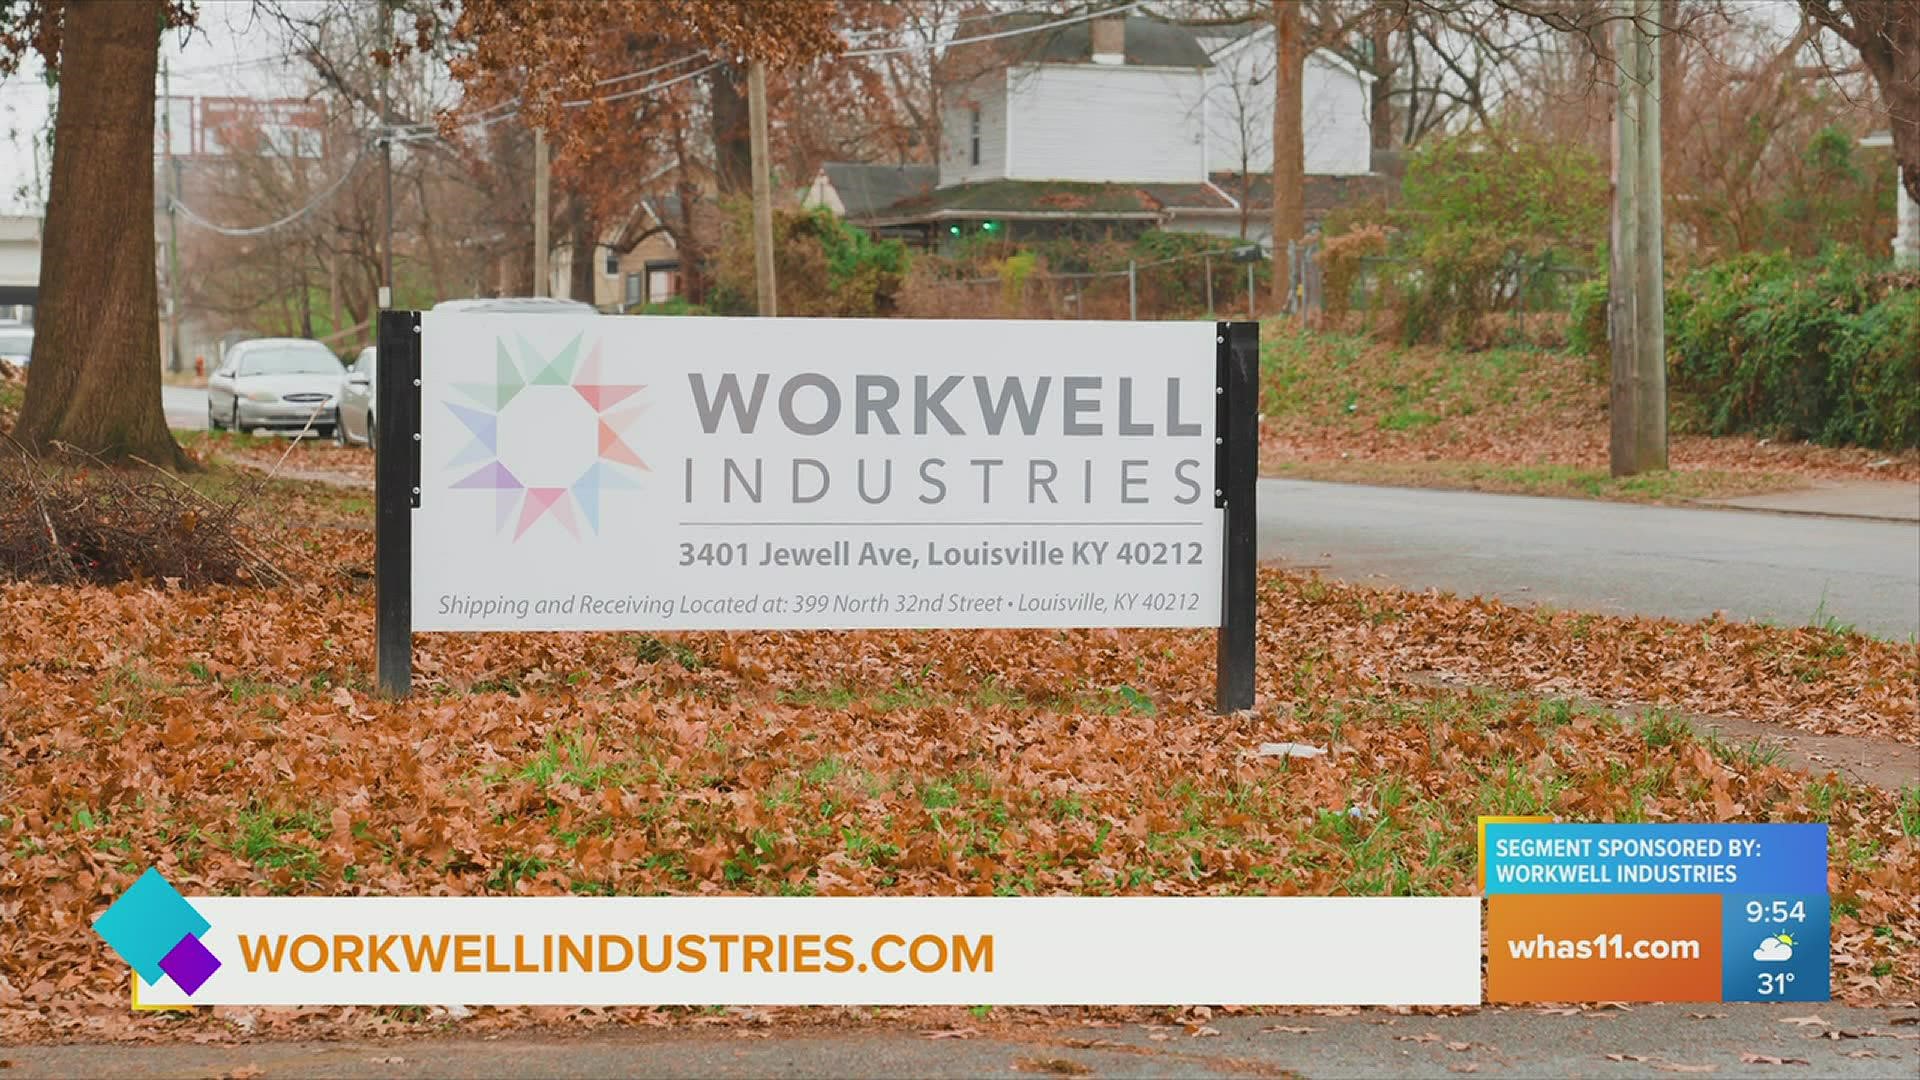 To learn more, visit WorkwellIndustries.com.